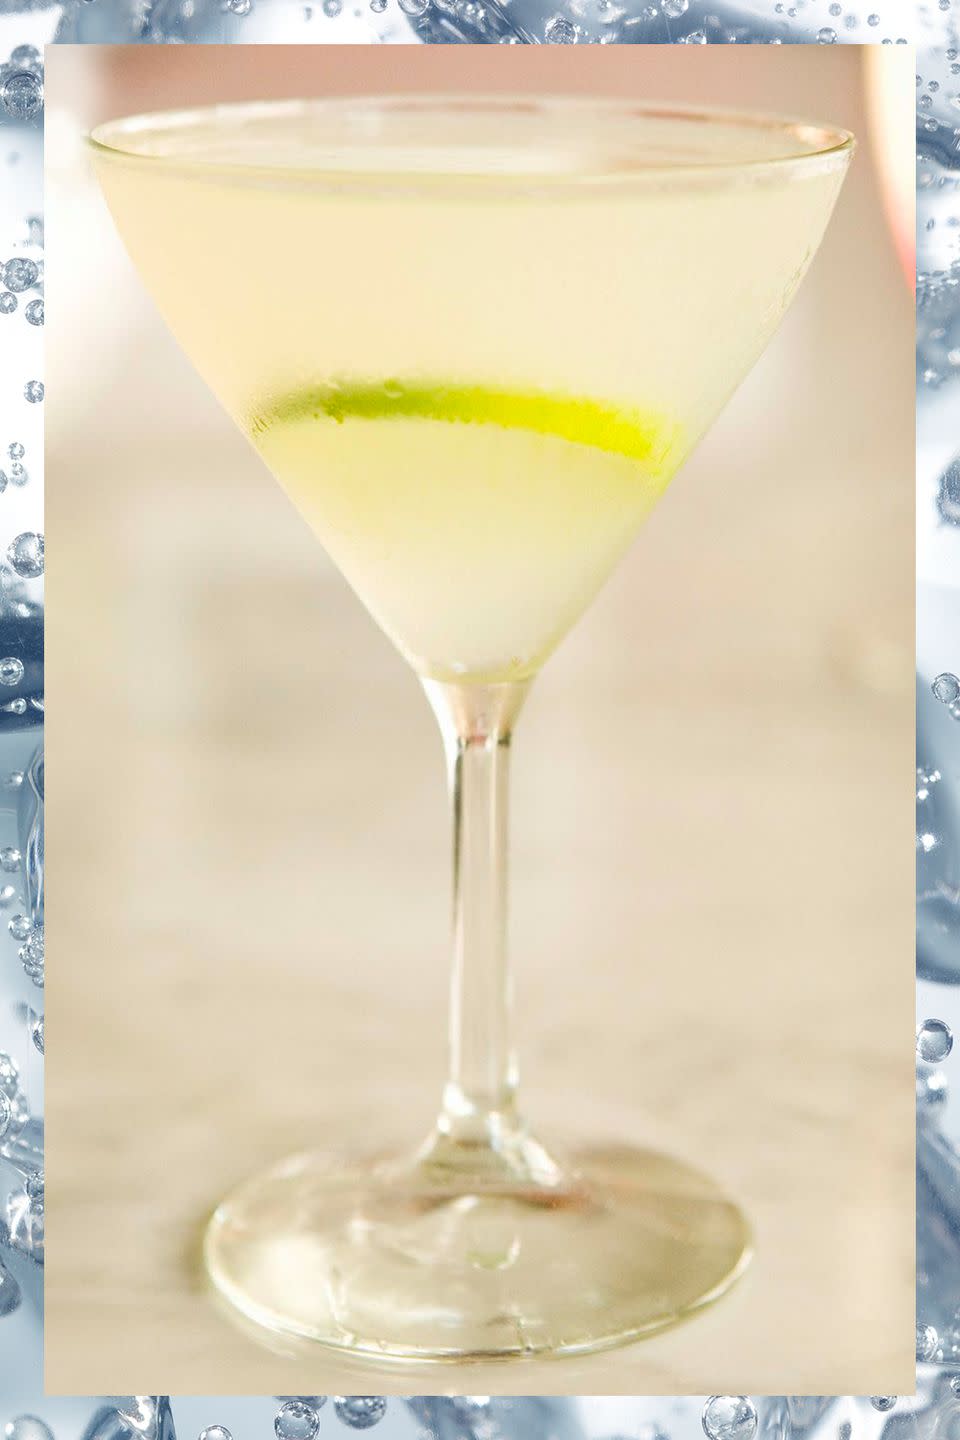 <p>The classic recipe calls for gin, but this drink is just as tasty if you substitute vodka instead.</p><p>- 2 oz gin or vodka<br>- .75 oz simple syrup<br>- .75 oz lime juice</p><p><em>Shake ingredients with ice and strain into cocktail glass.</em></p>